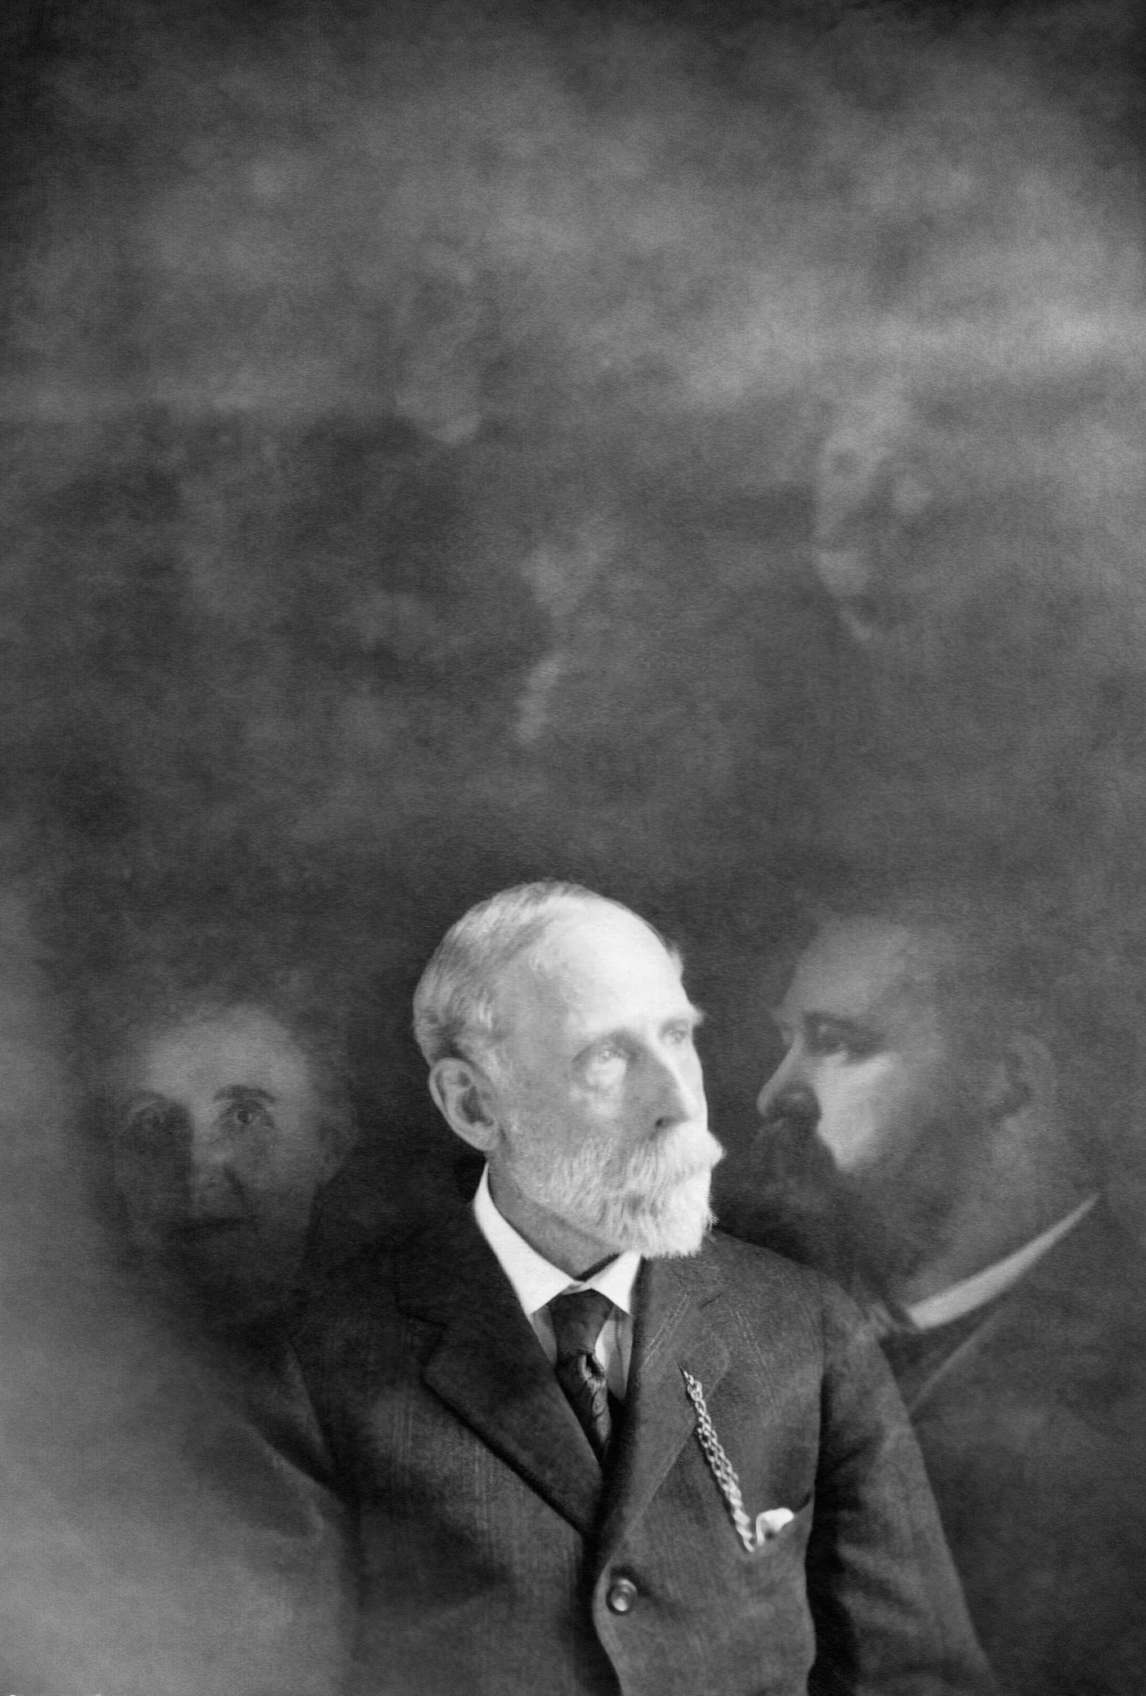 Homer Watson with spirits of the dead (faked photograph), 1930